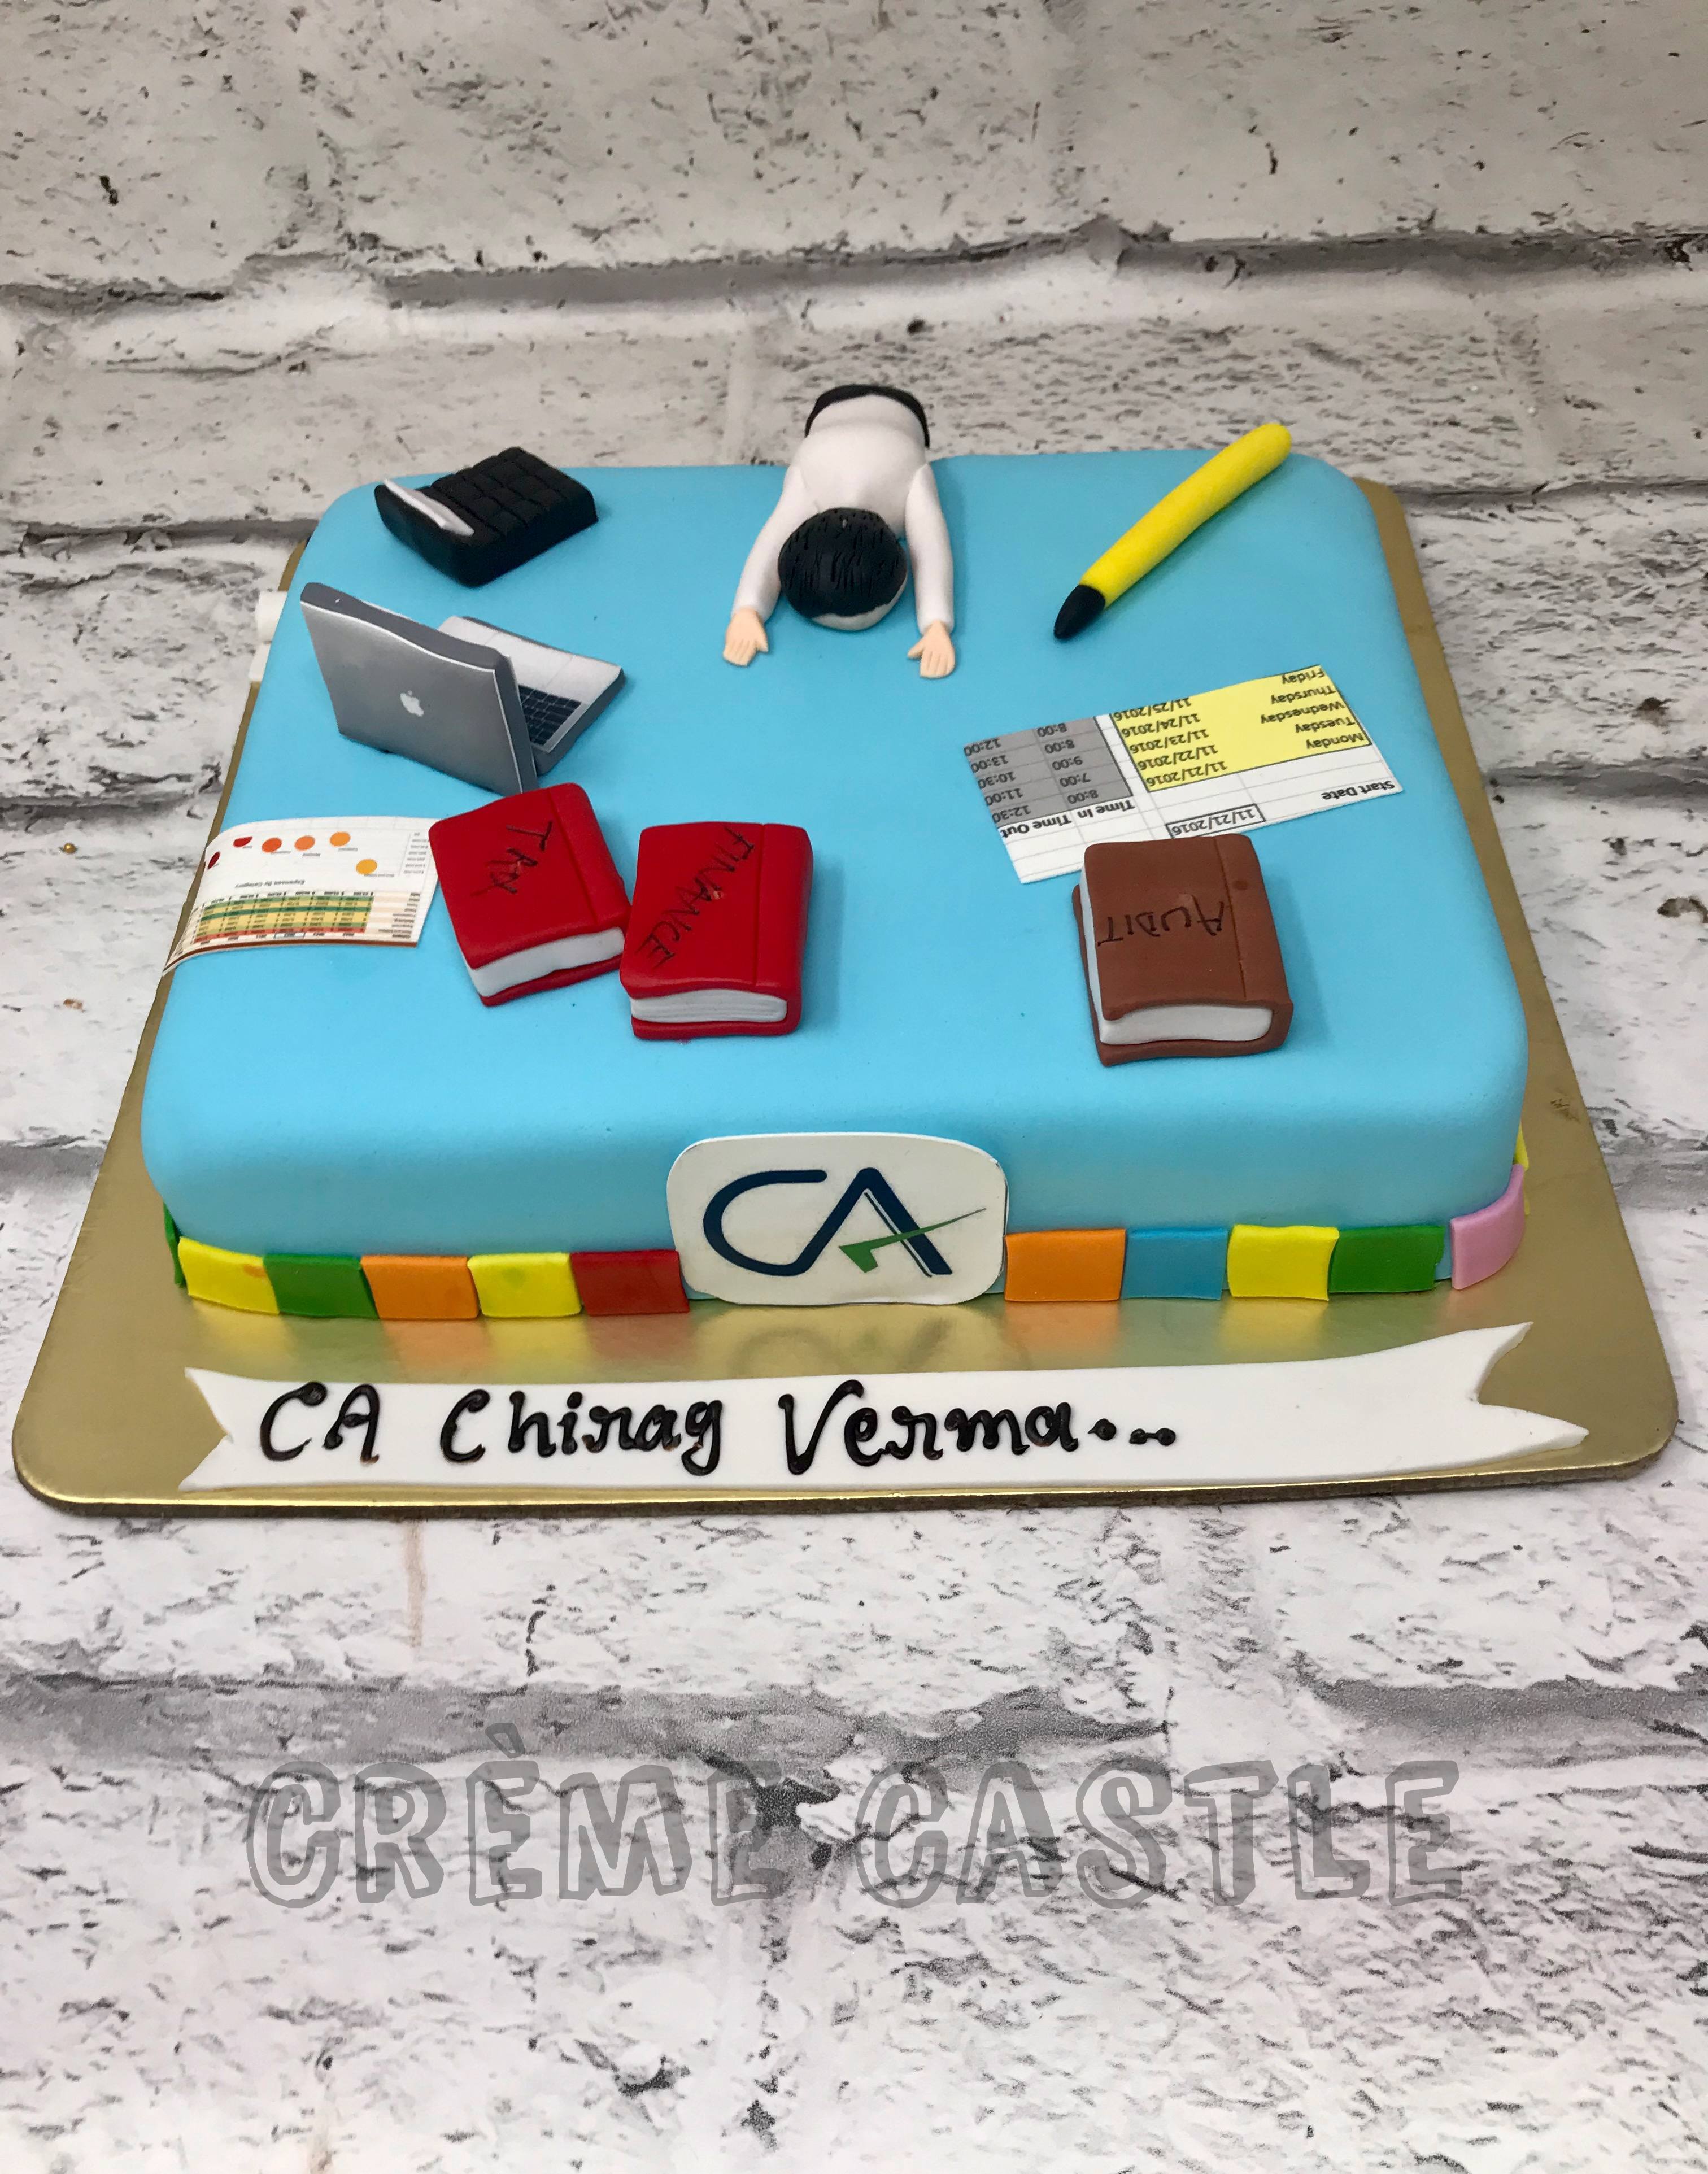 Update more than 72 chartered accountant theme cake best - in.daotaonec